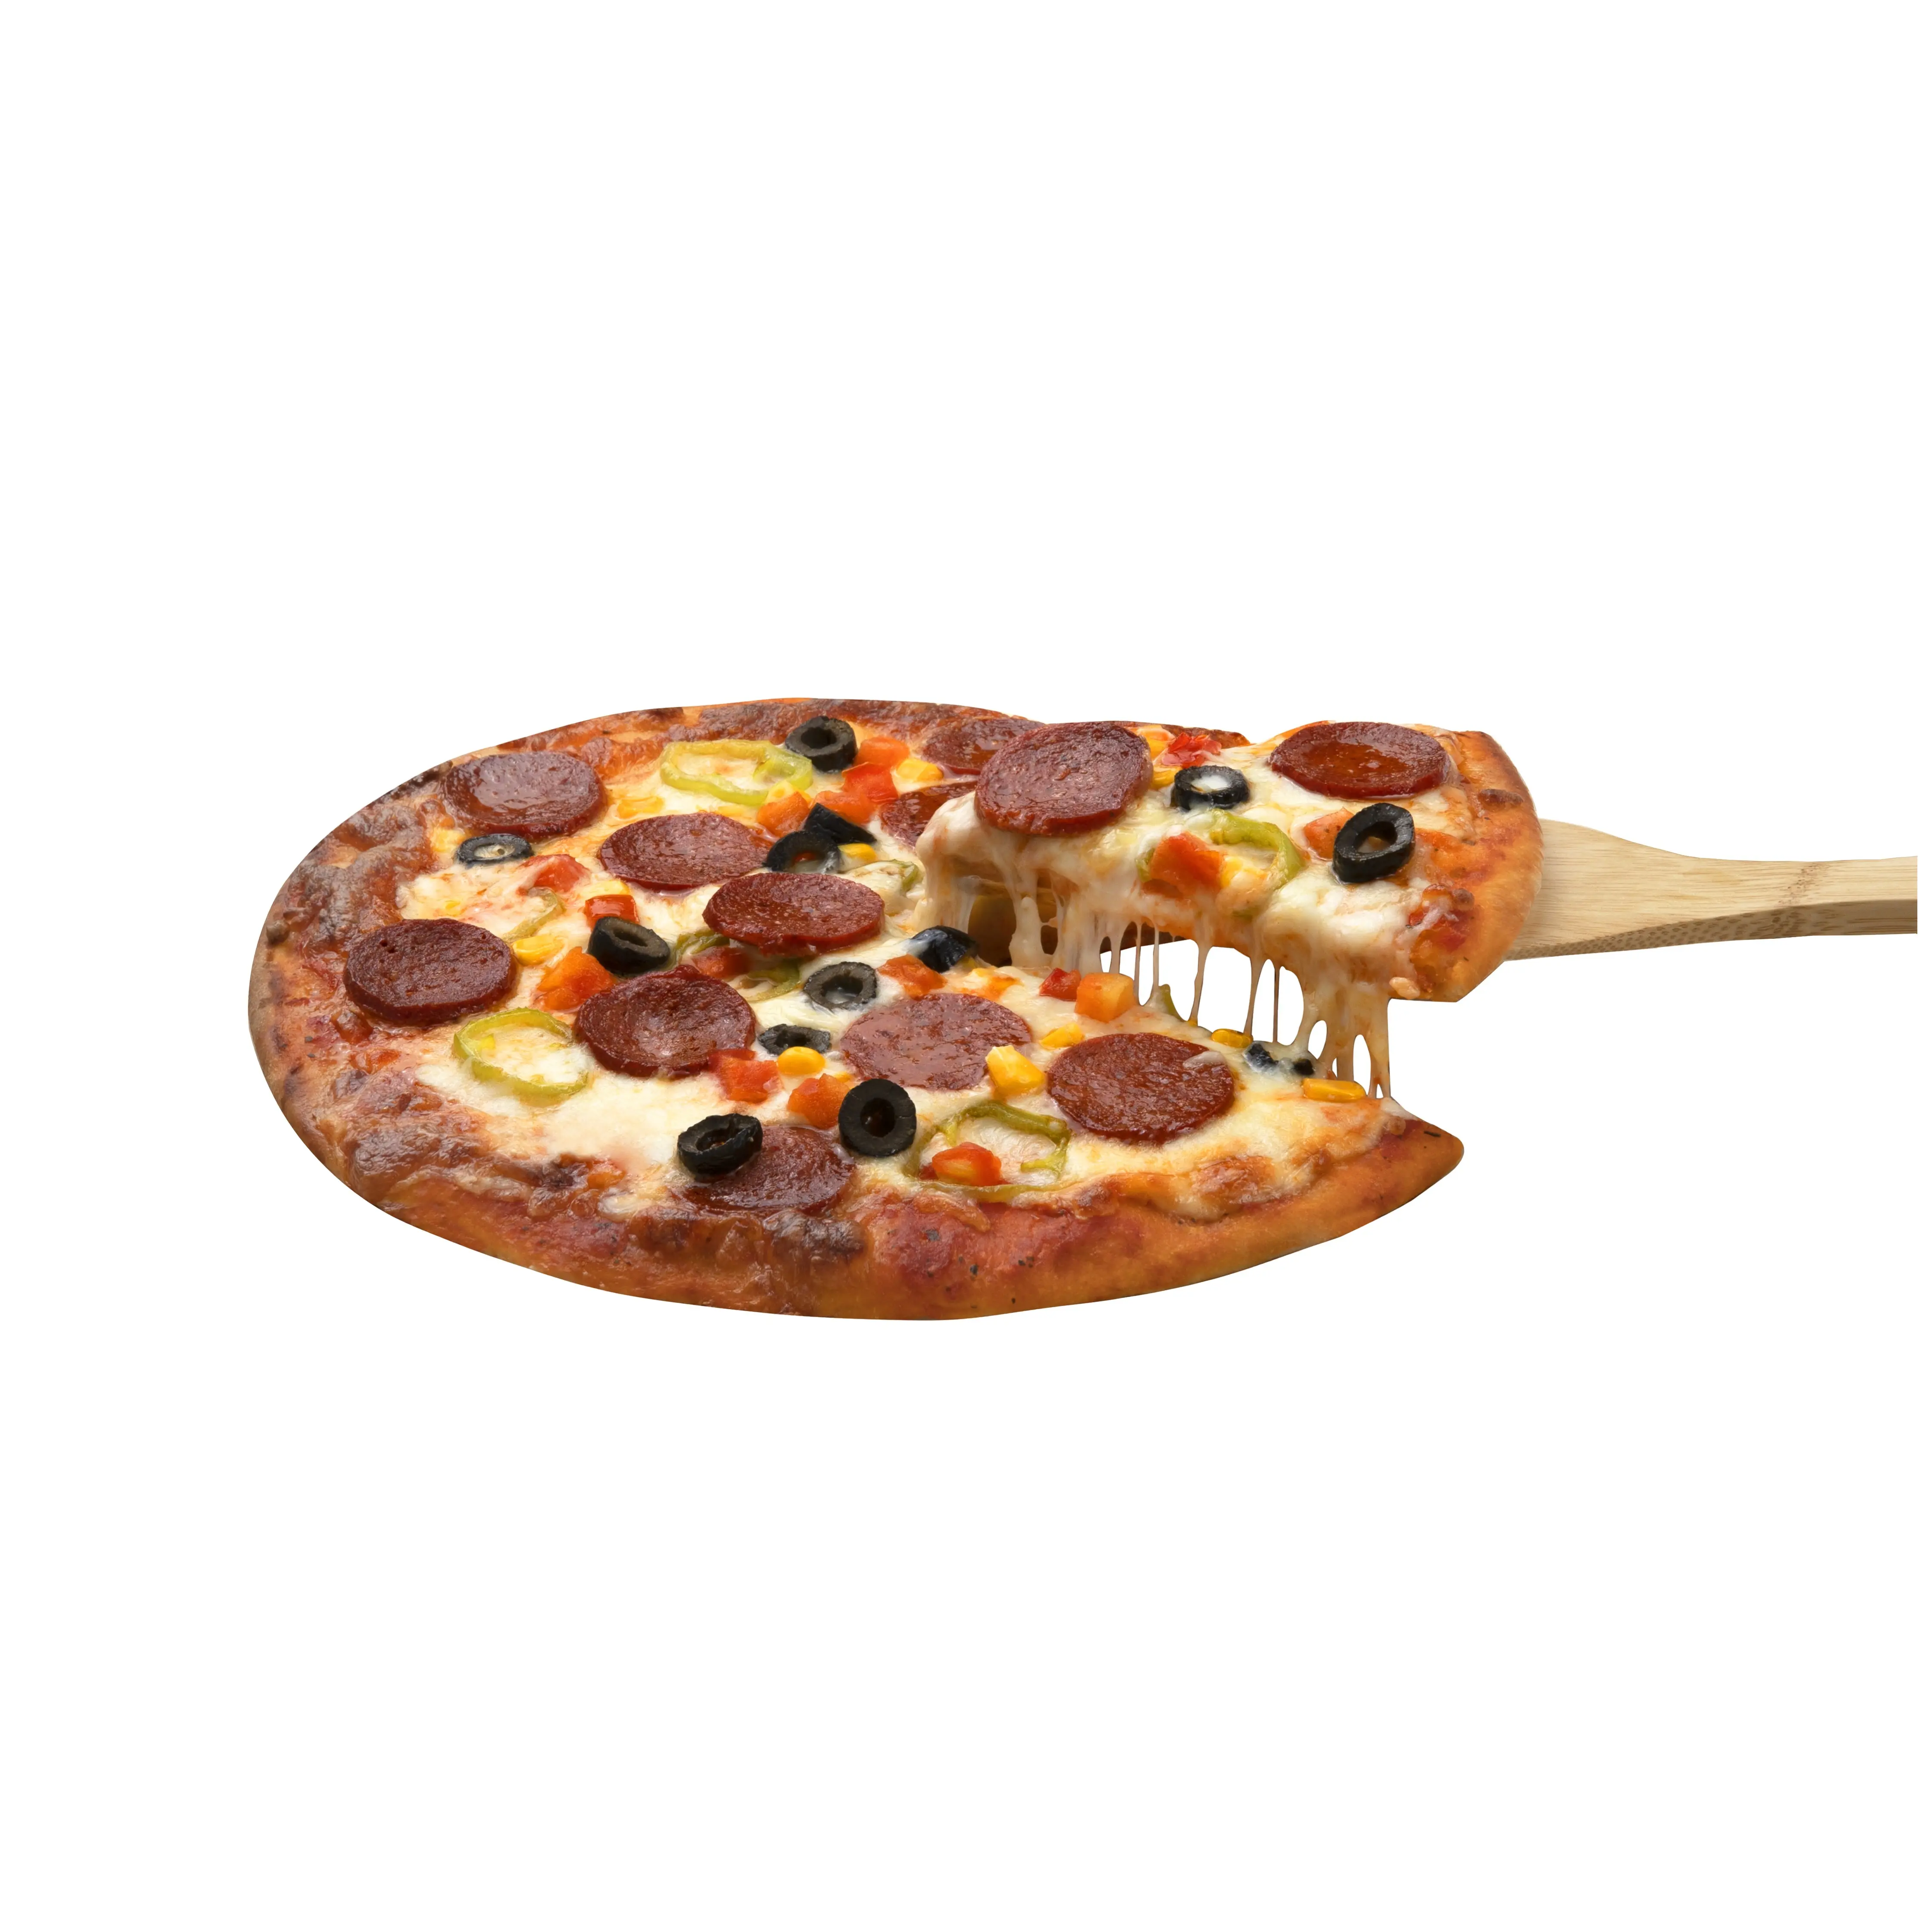 Pizza Frozen Baked Pizza Vacuum Bag Stir Frozen Pizza For Restaurants And Shops Made in Turkey